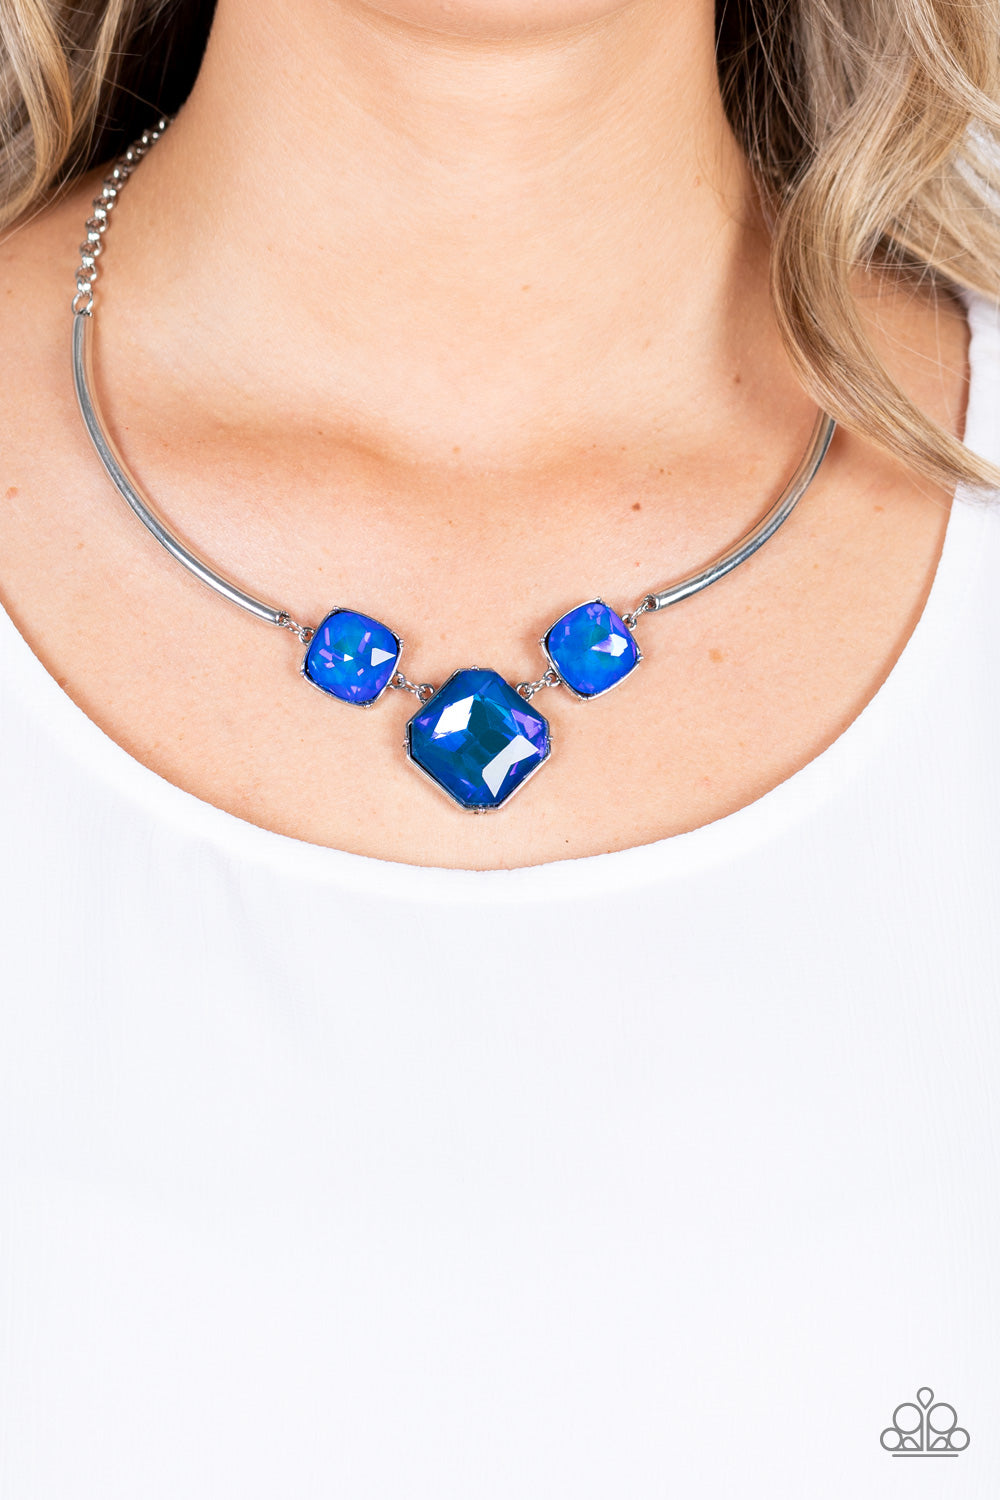 Divine IRIDESCENCE - Blue Necklace Set October 2021 Life of the Party Exclusive - Princess Glam Shop